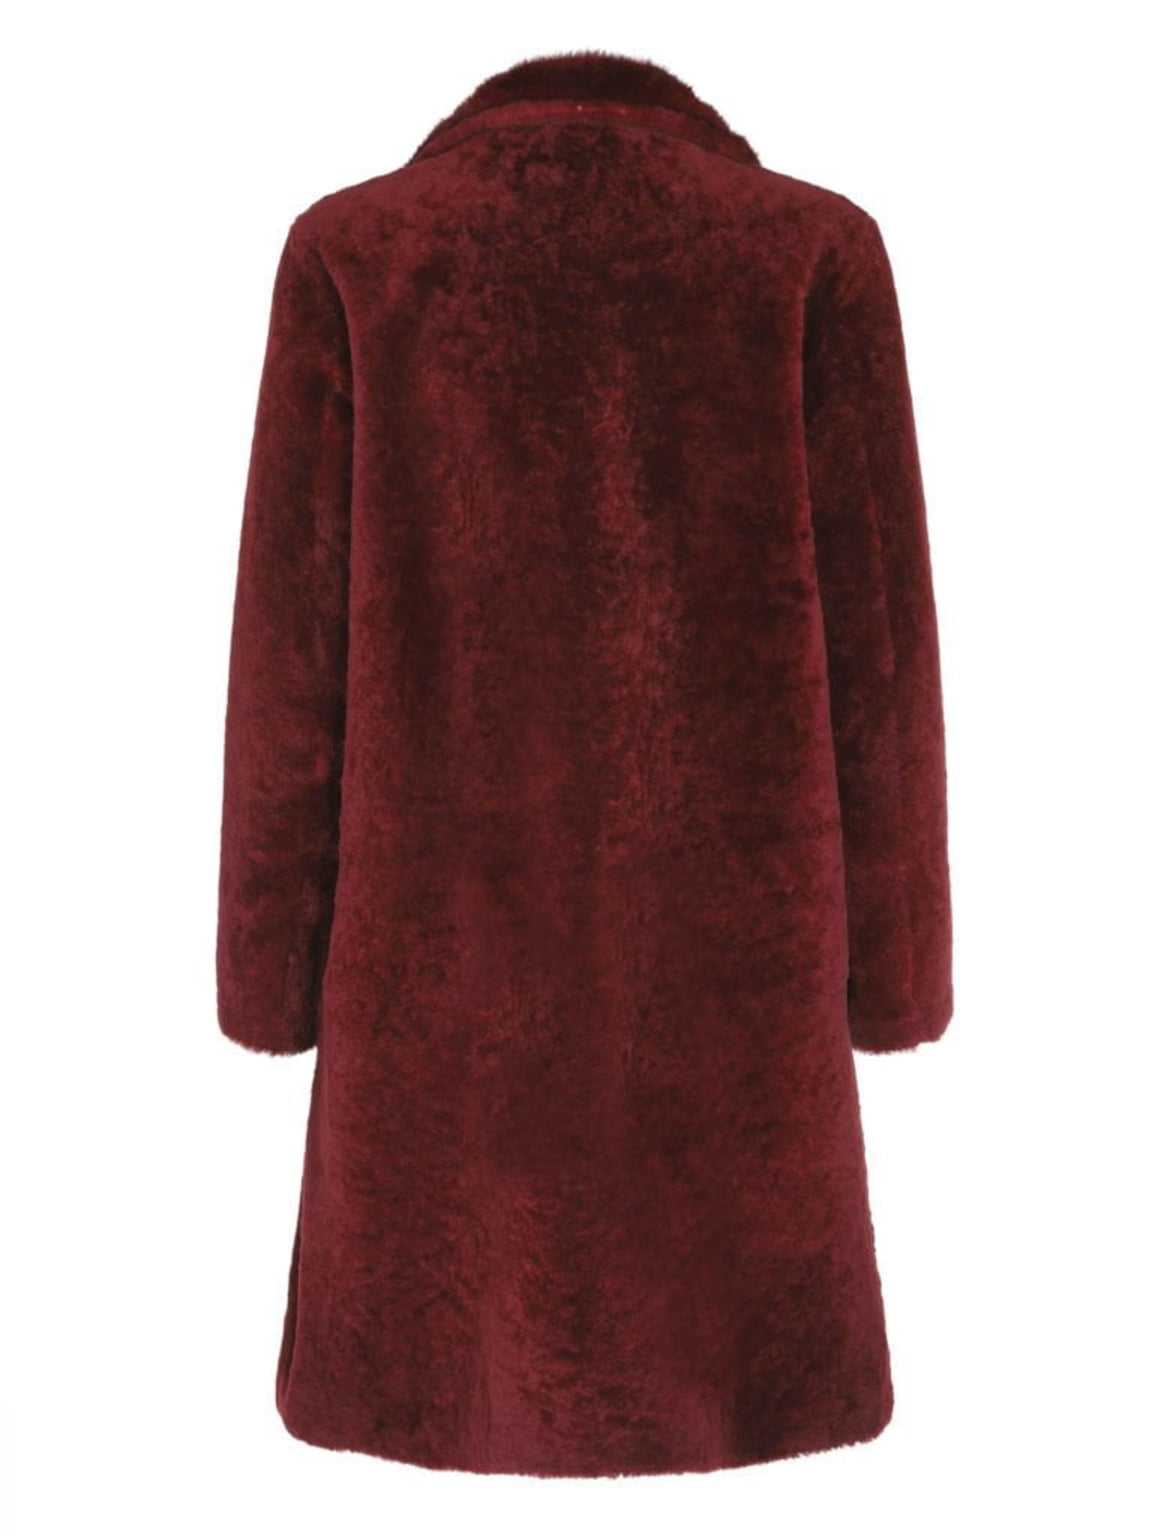 CLARY COAT - RED